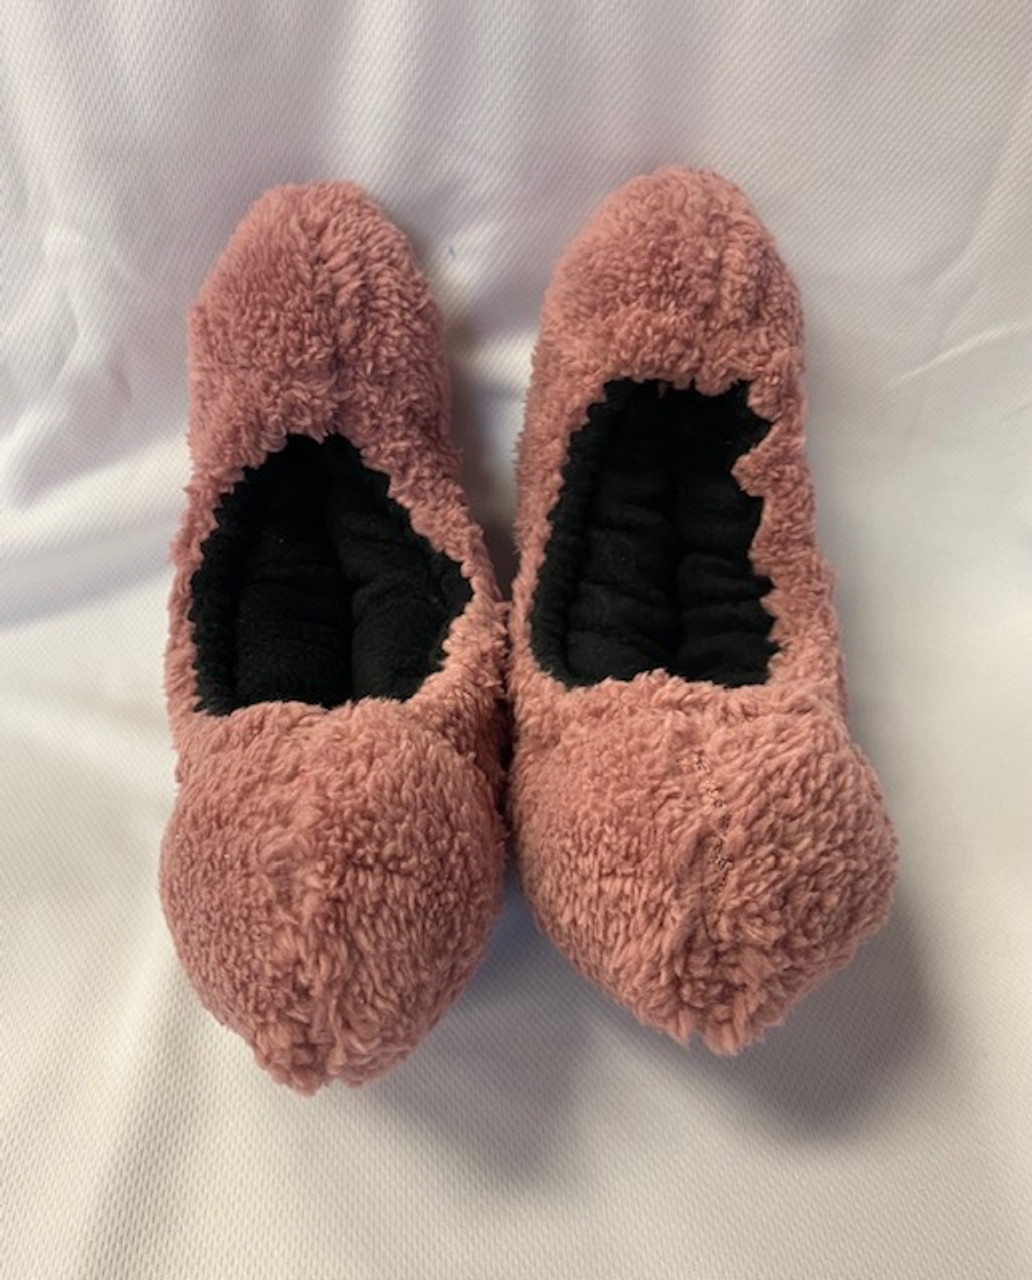 Fuzzy Soakers